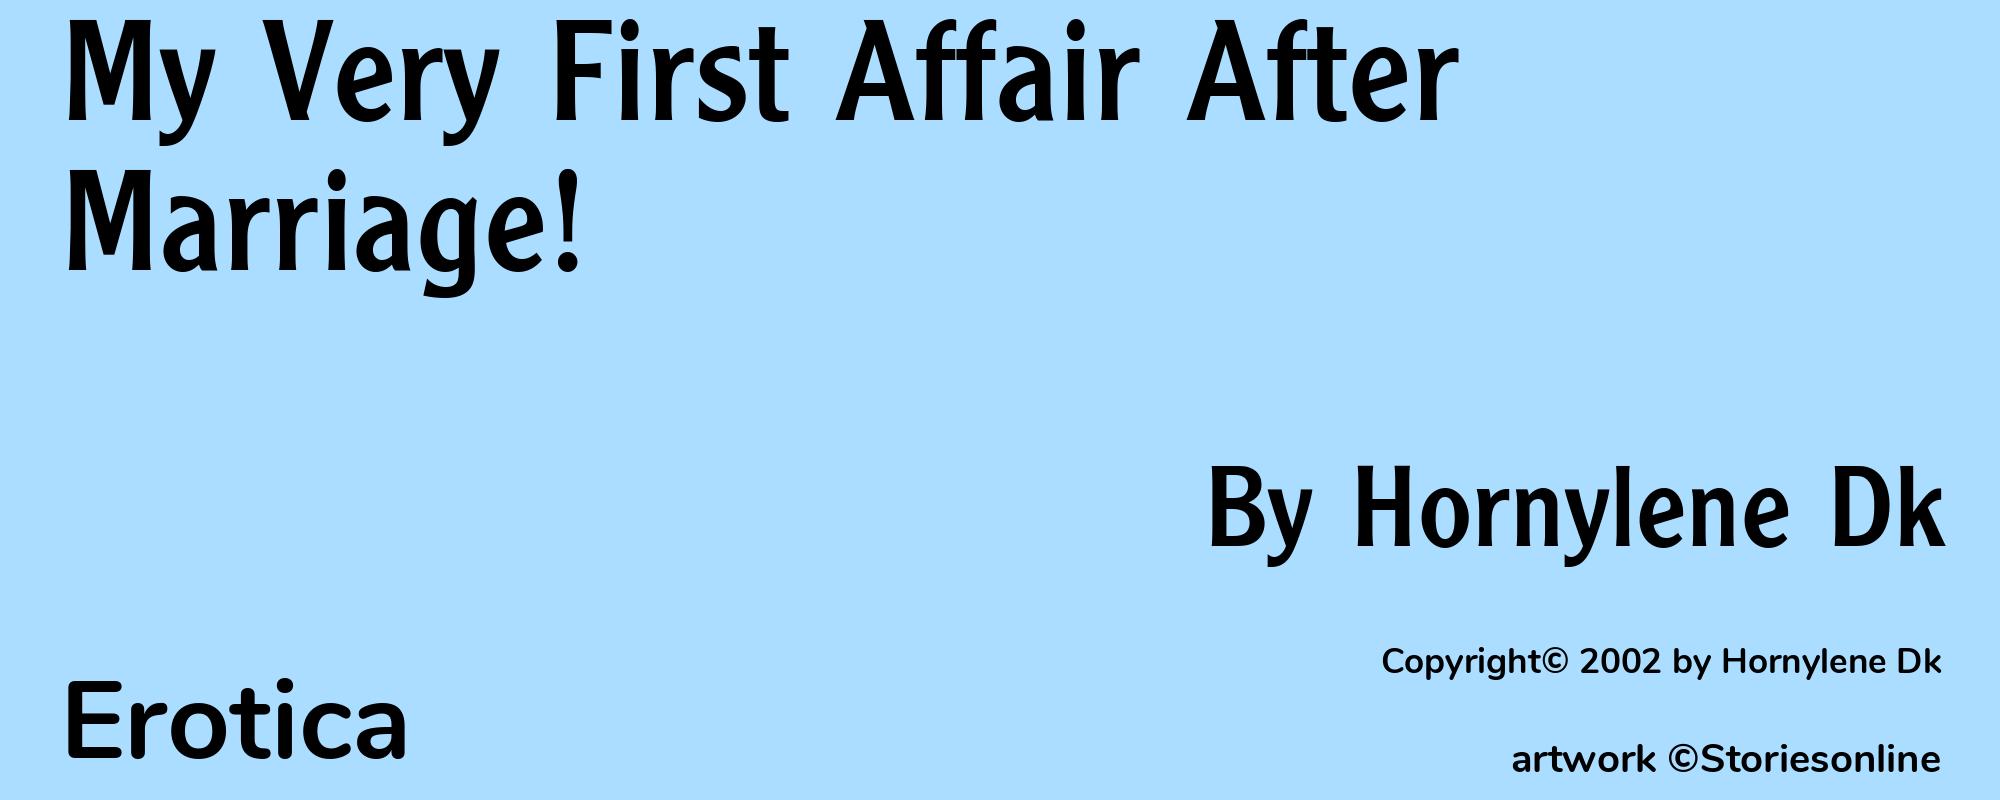 My Very First Affair After Marriage! - Cover